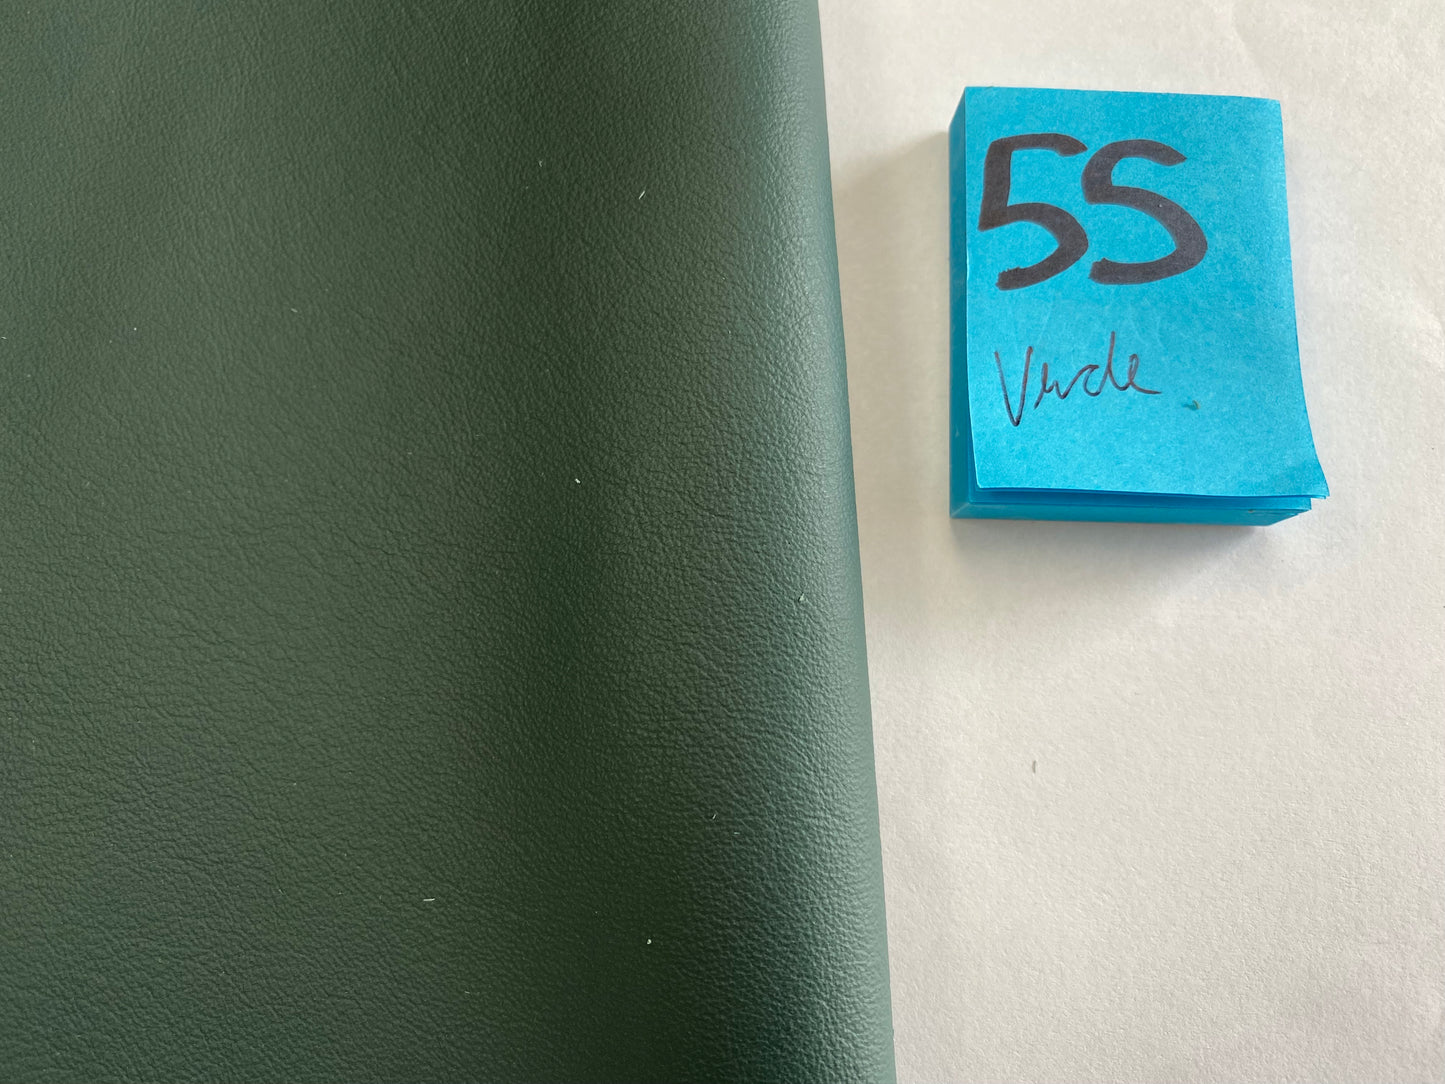 Leather 2046  Verde 81" x 40" with tails 1.2-1.3mm  Leather#55  - USA Shipping Included in Price!